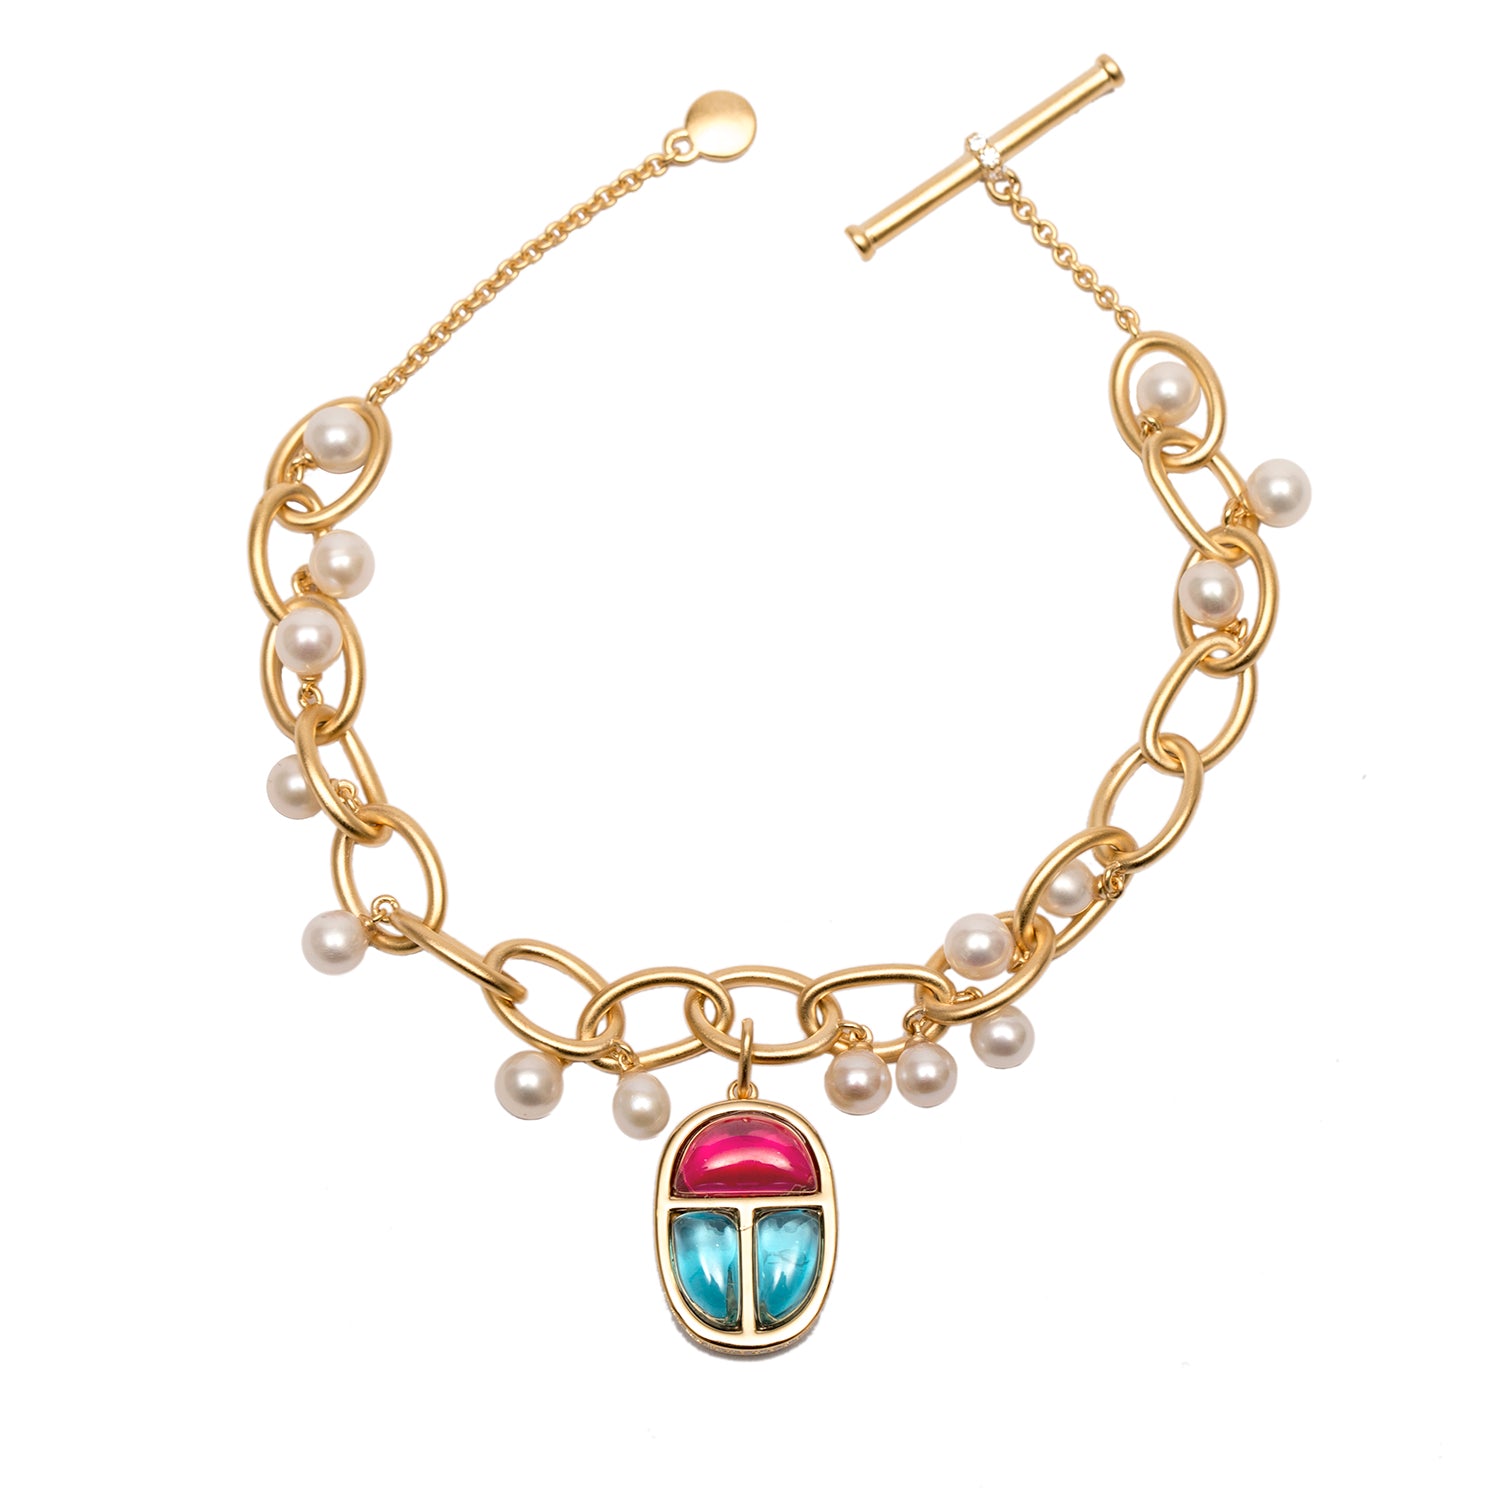 Links Bracelet Vermeil Gold With Scarab Amulet Charm And Pearls